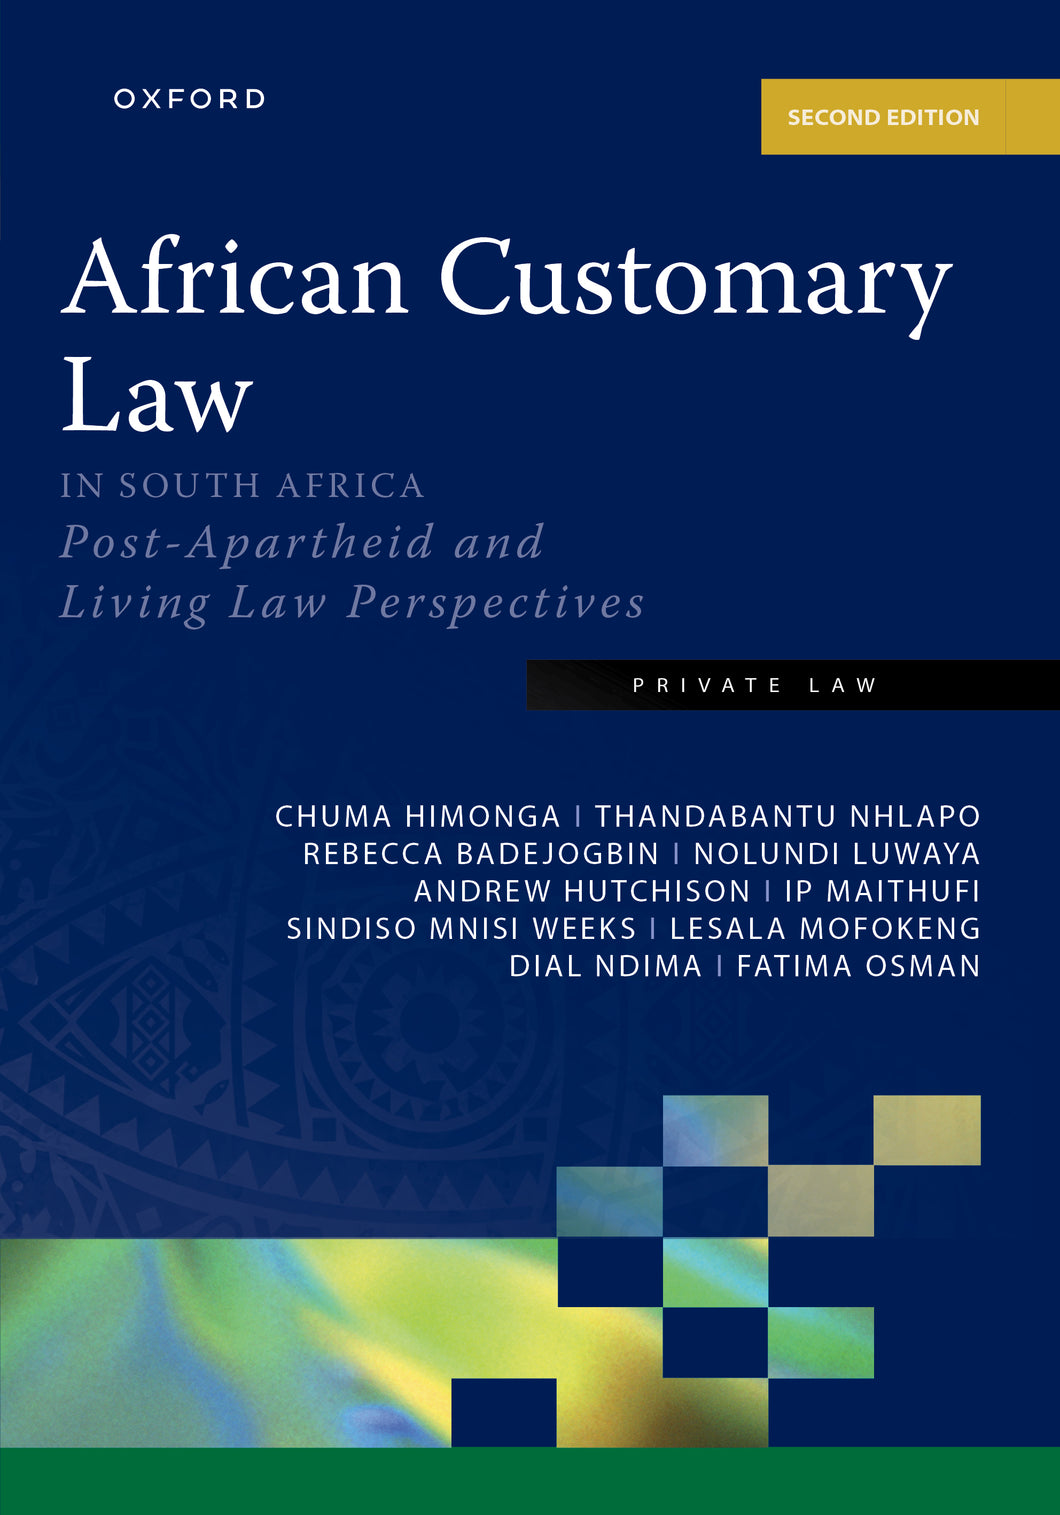 African Customary Law in South Africa 2nd